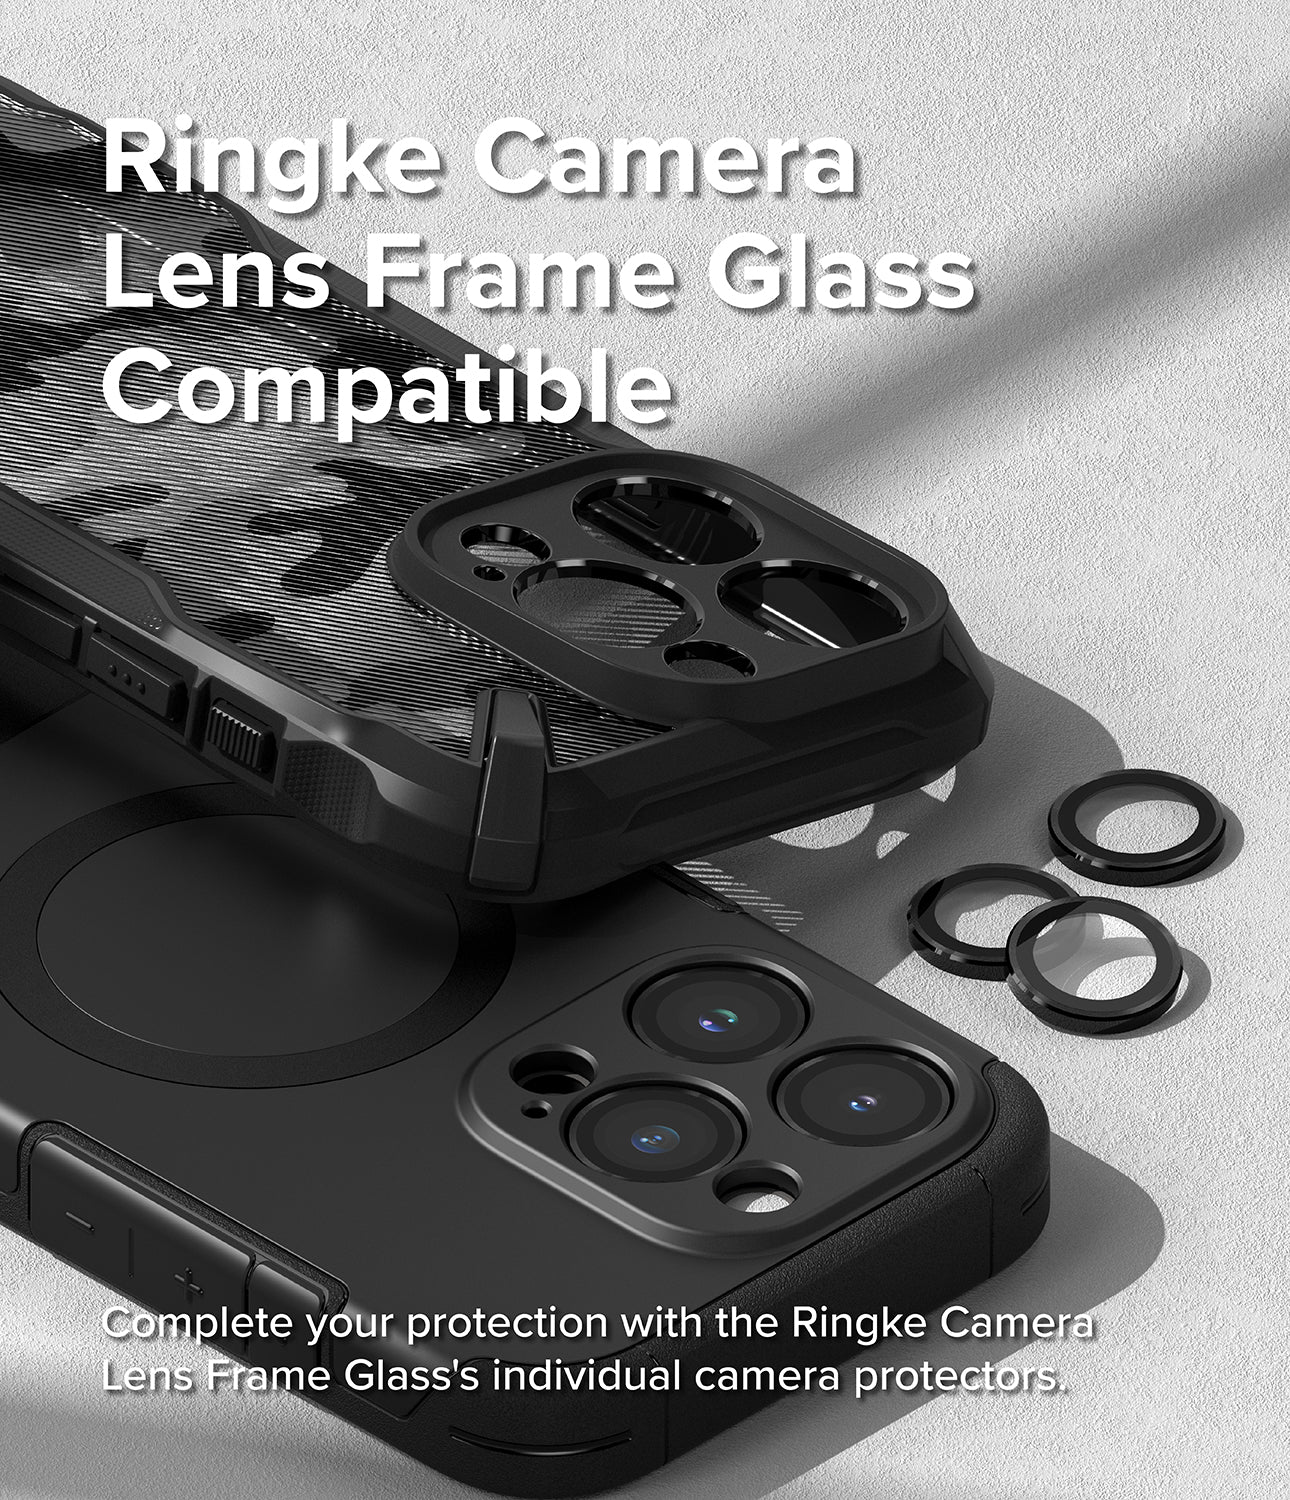 iPhone 15 Pro Max Case | Alles - Ringke Camera Lens Frame Glass Compatible. Complete your protection with the Ringke Camera Lens Frame Glass' individual camera protectors.